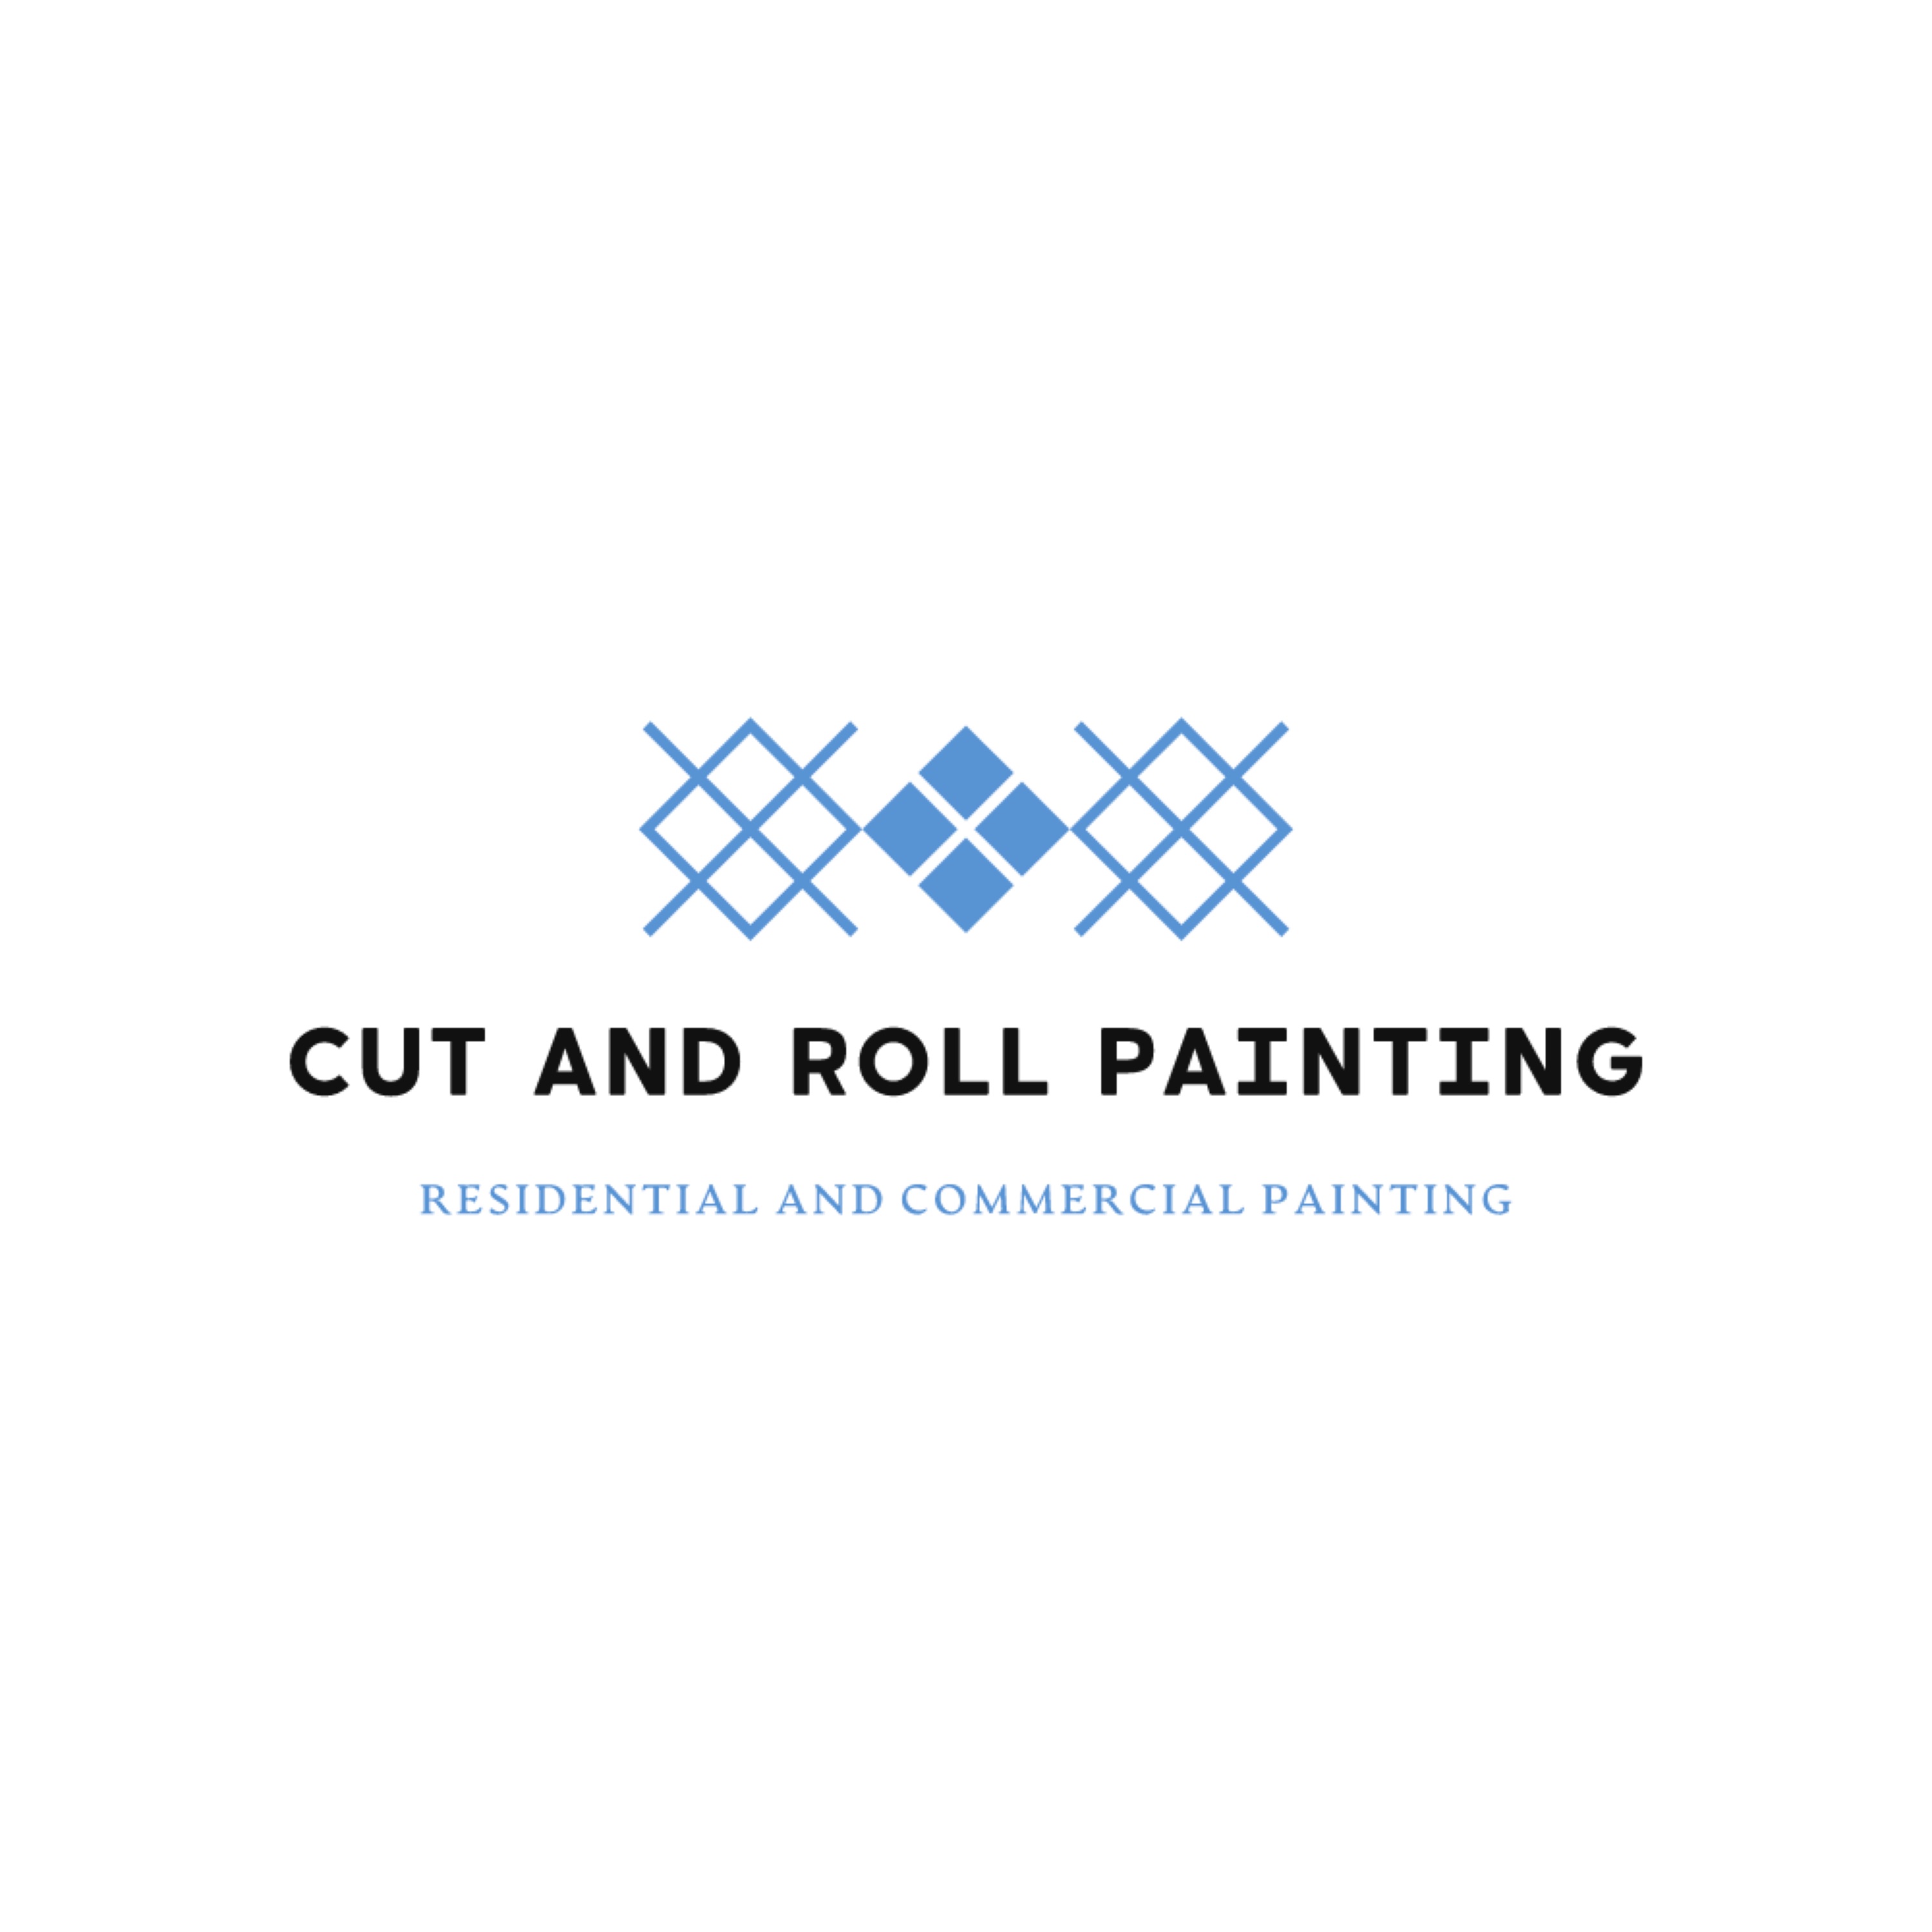 Cut and Roll Painting Logo